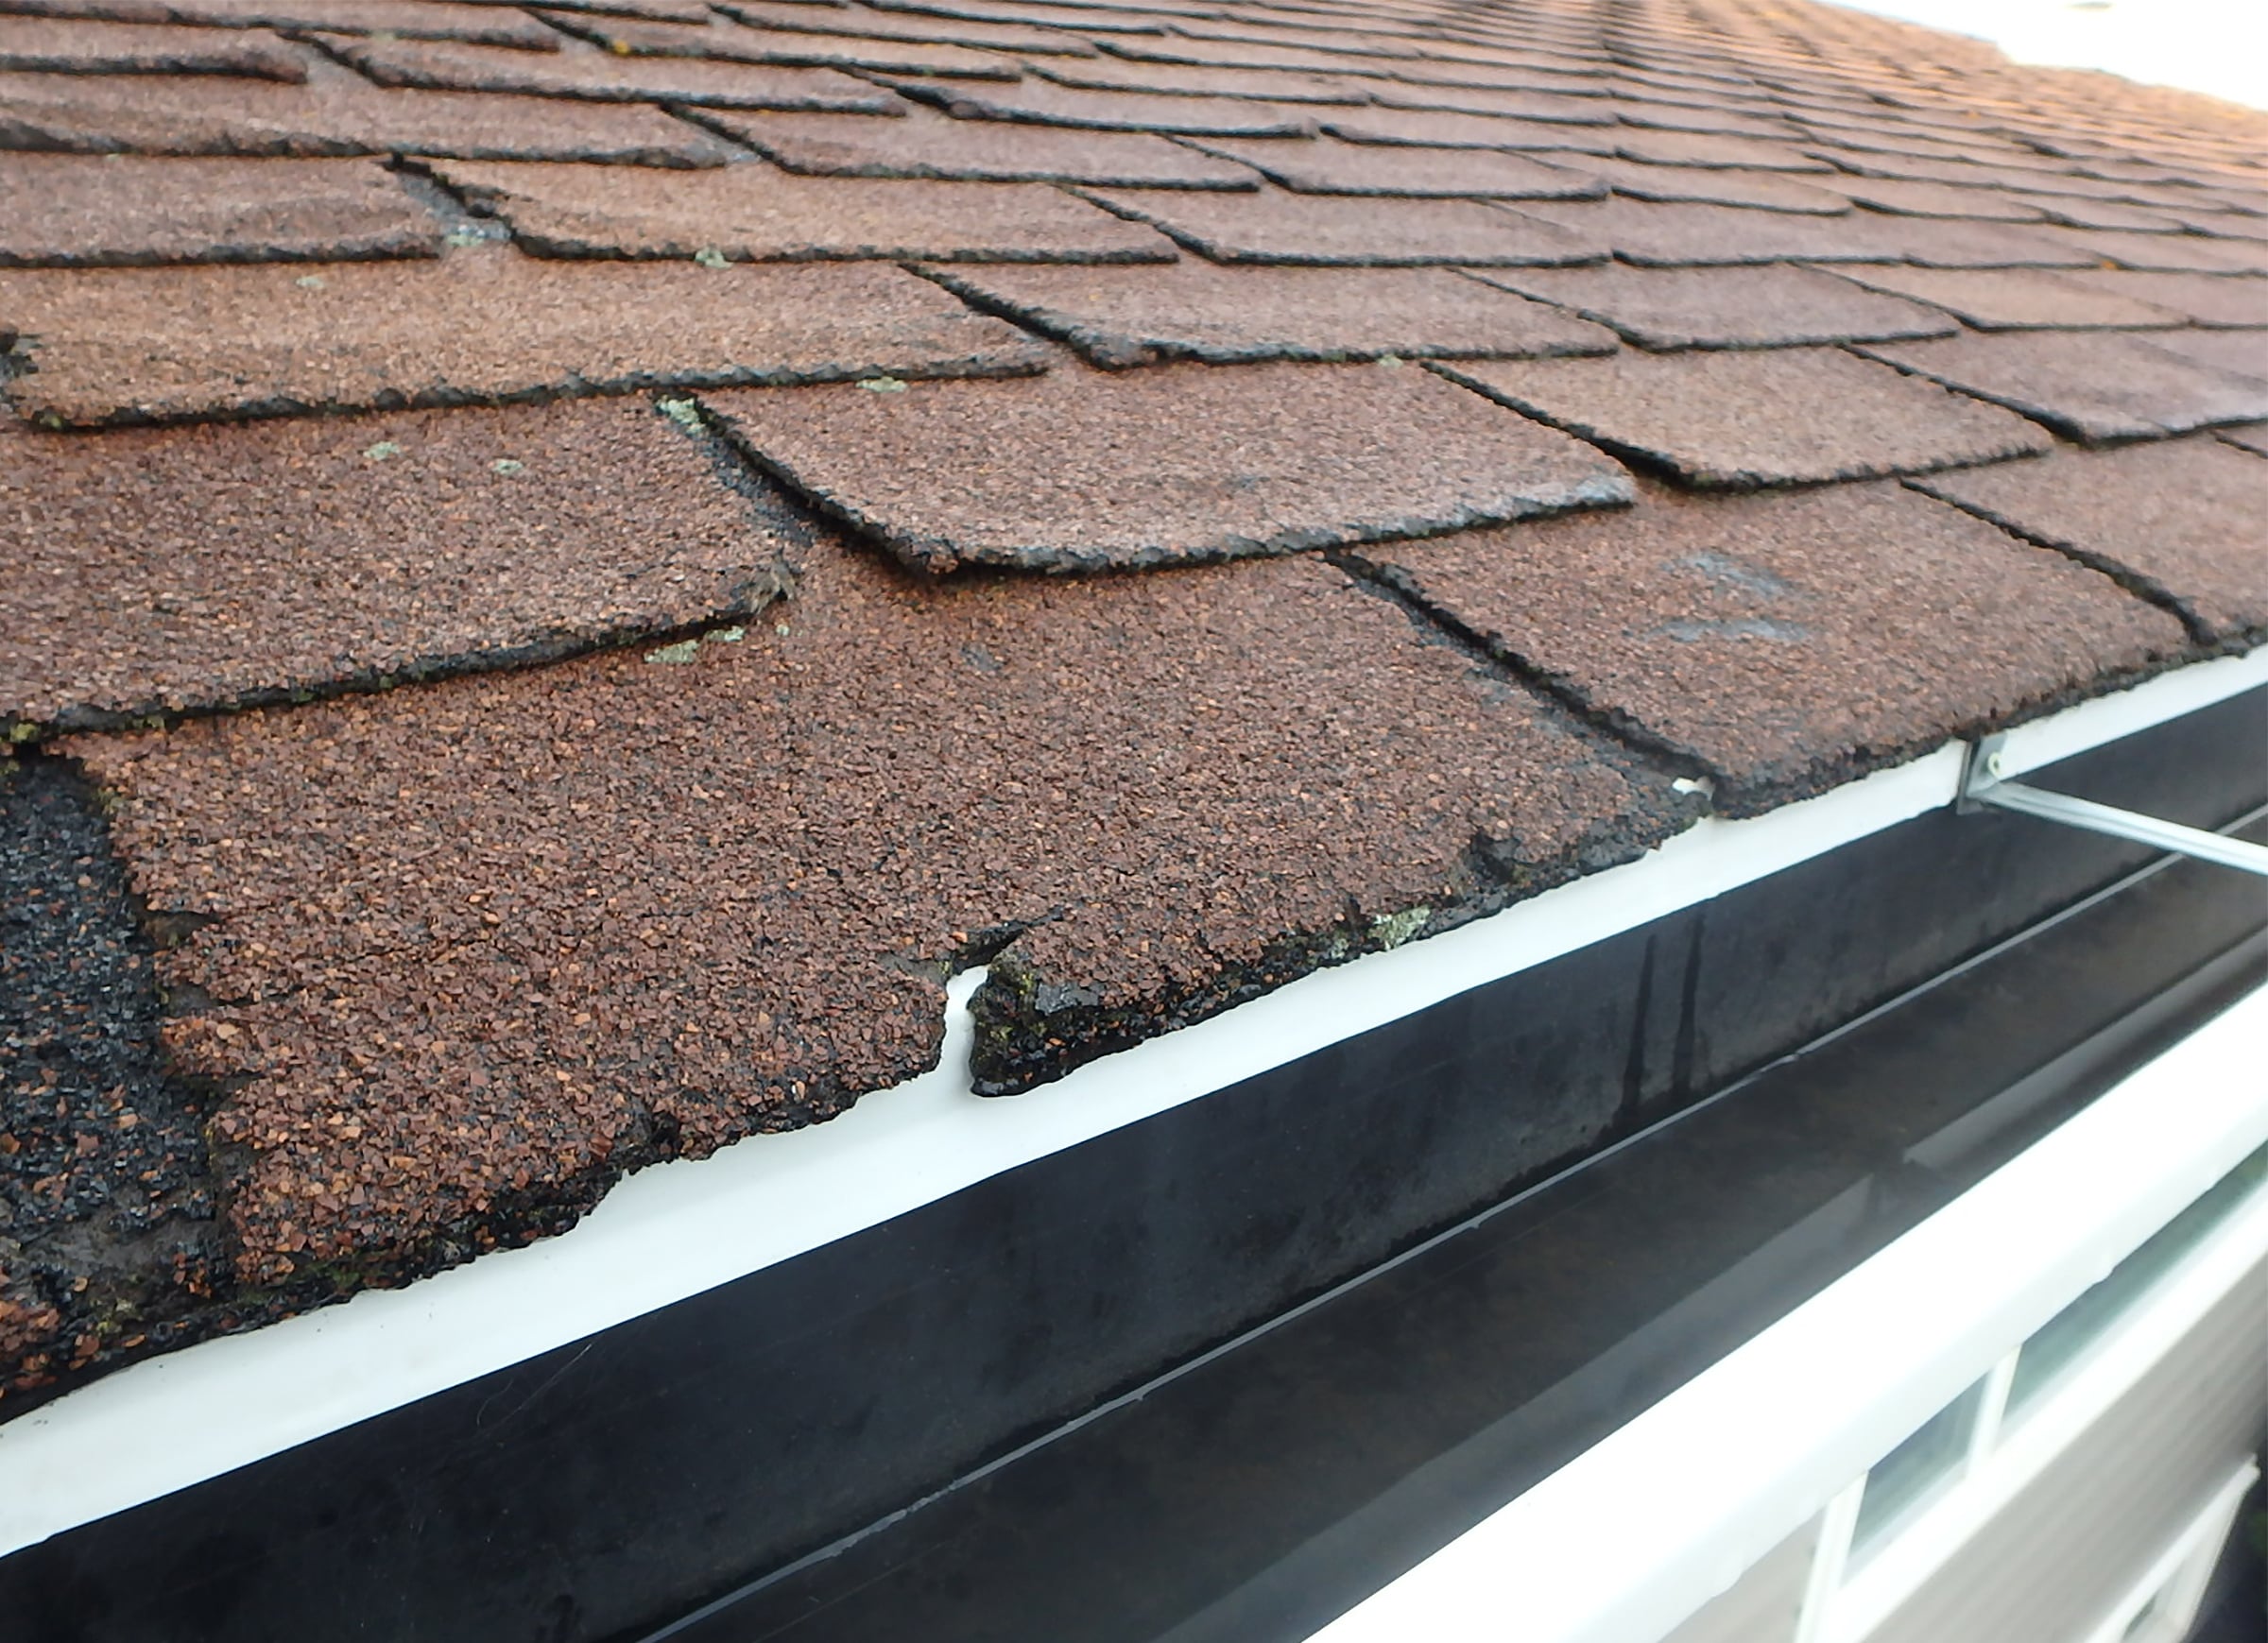 Brown shingle roof with hail damage